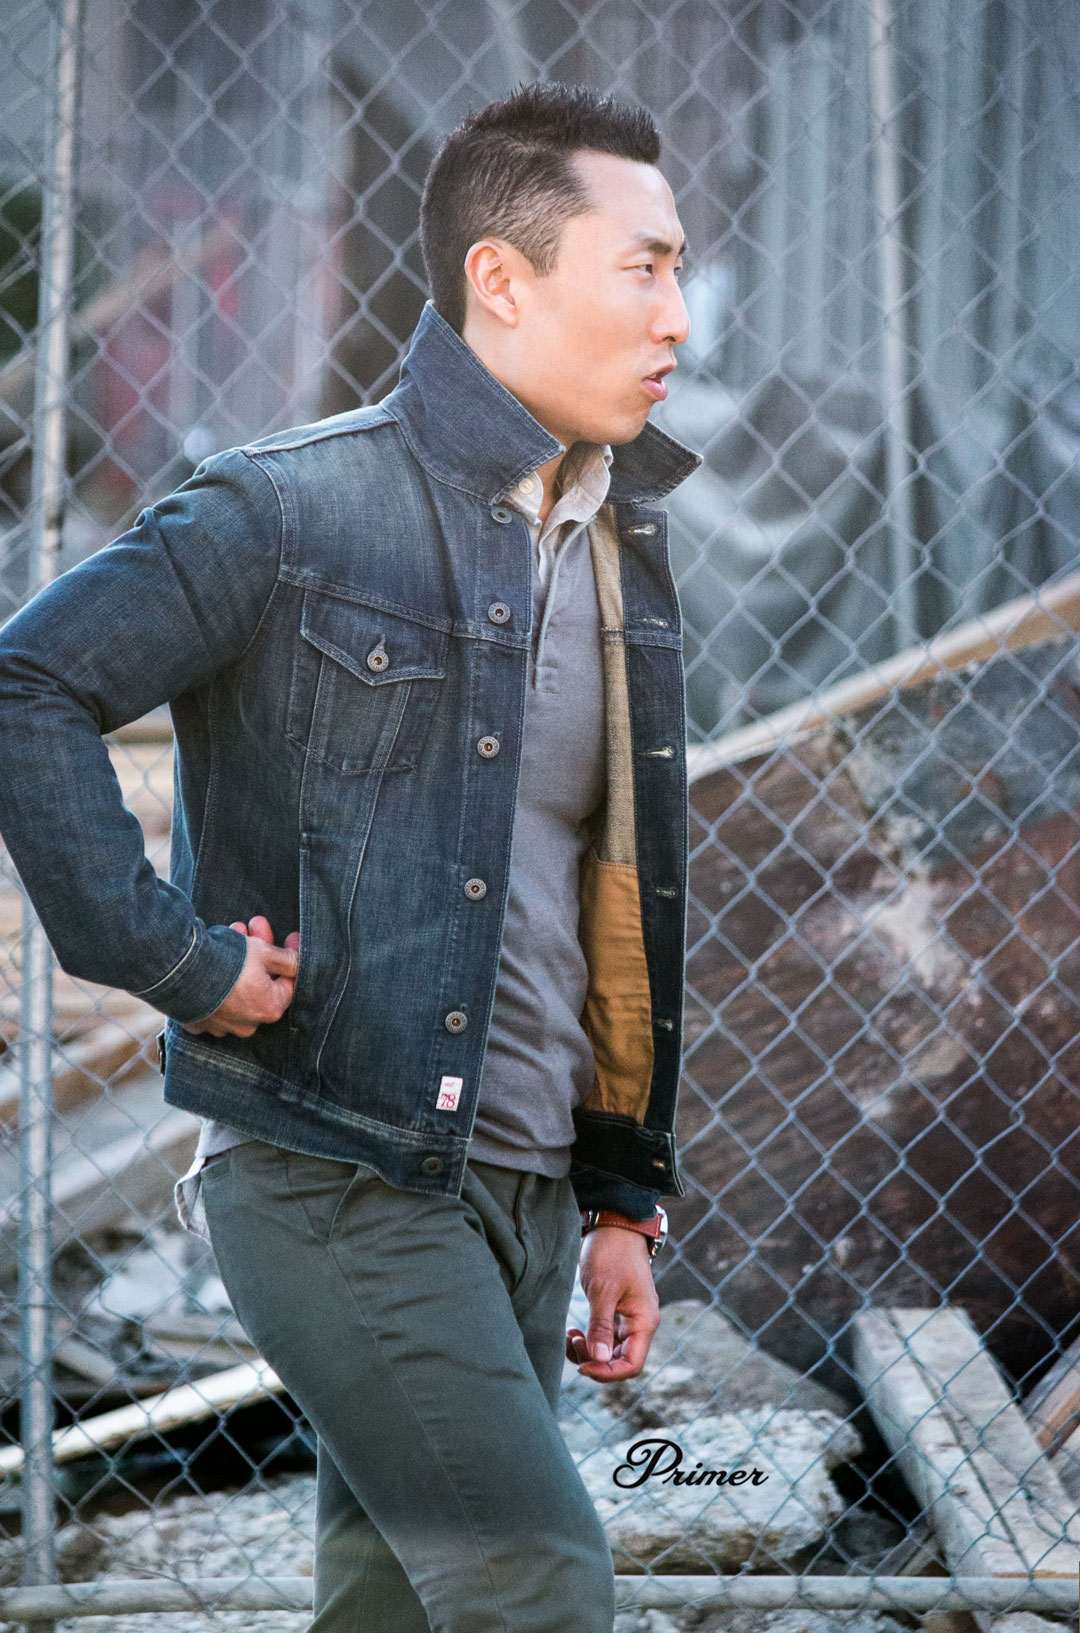 The Getup: Casual, Rugged Layers   Shop the Look   Denim Jacket   Henley   Chinos